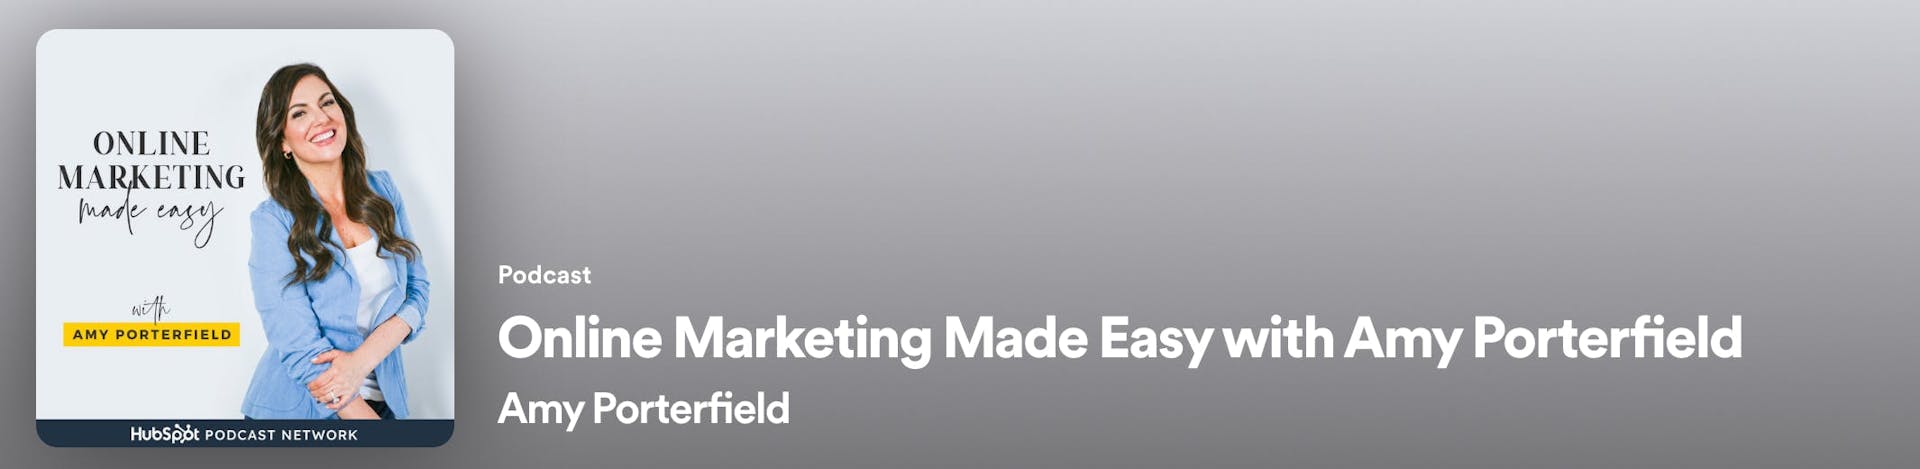 online marketing made easy podcast